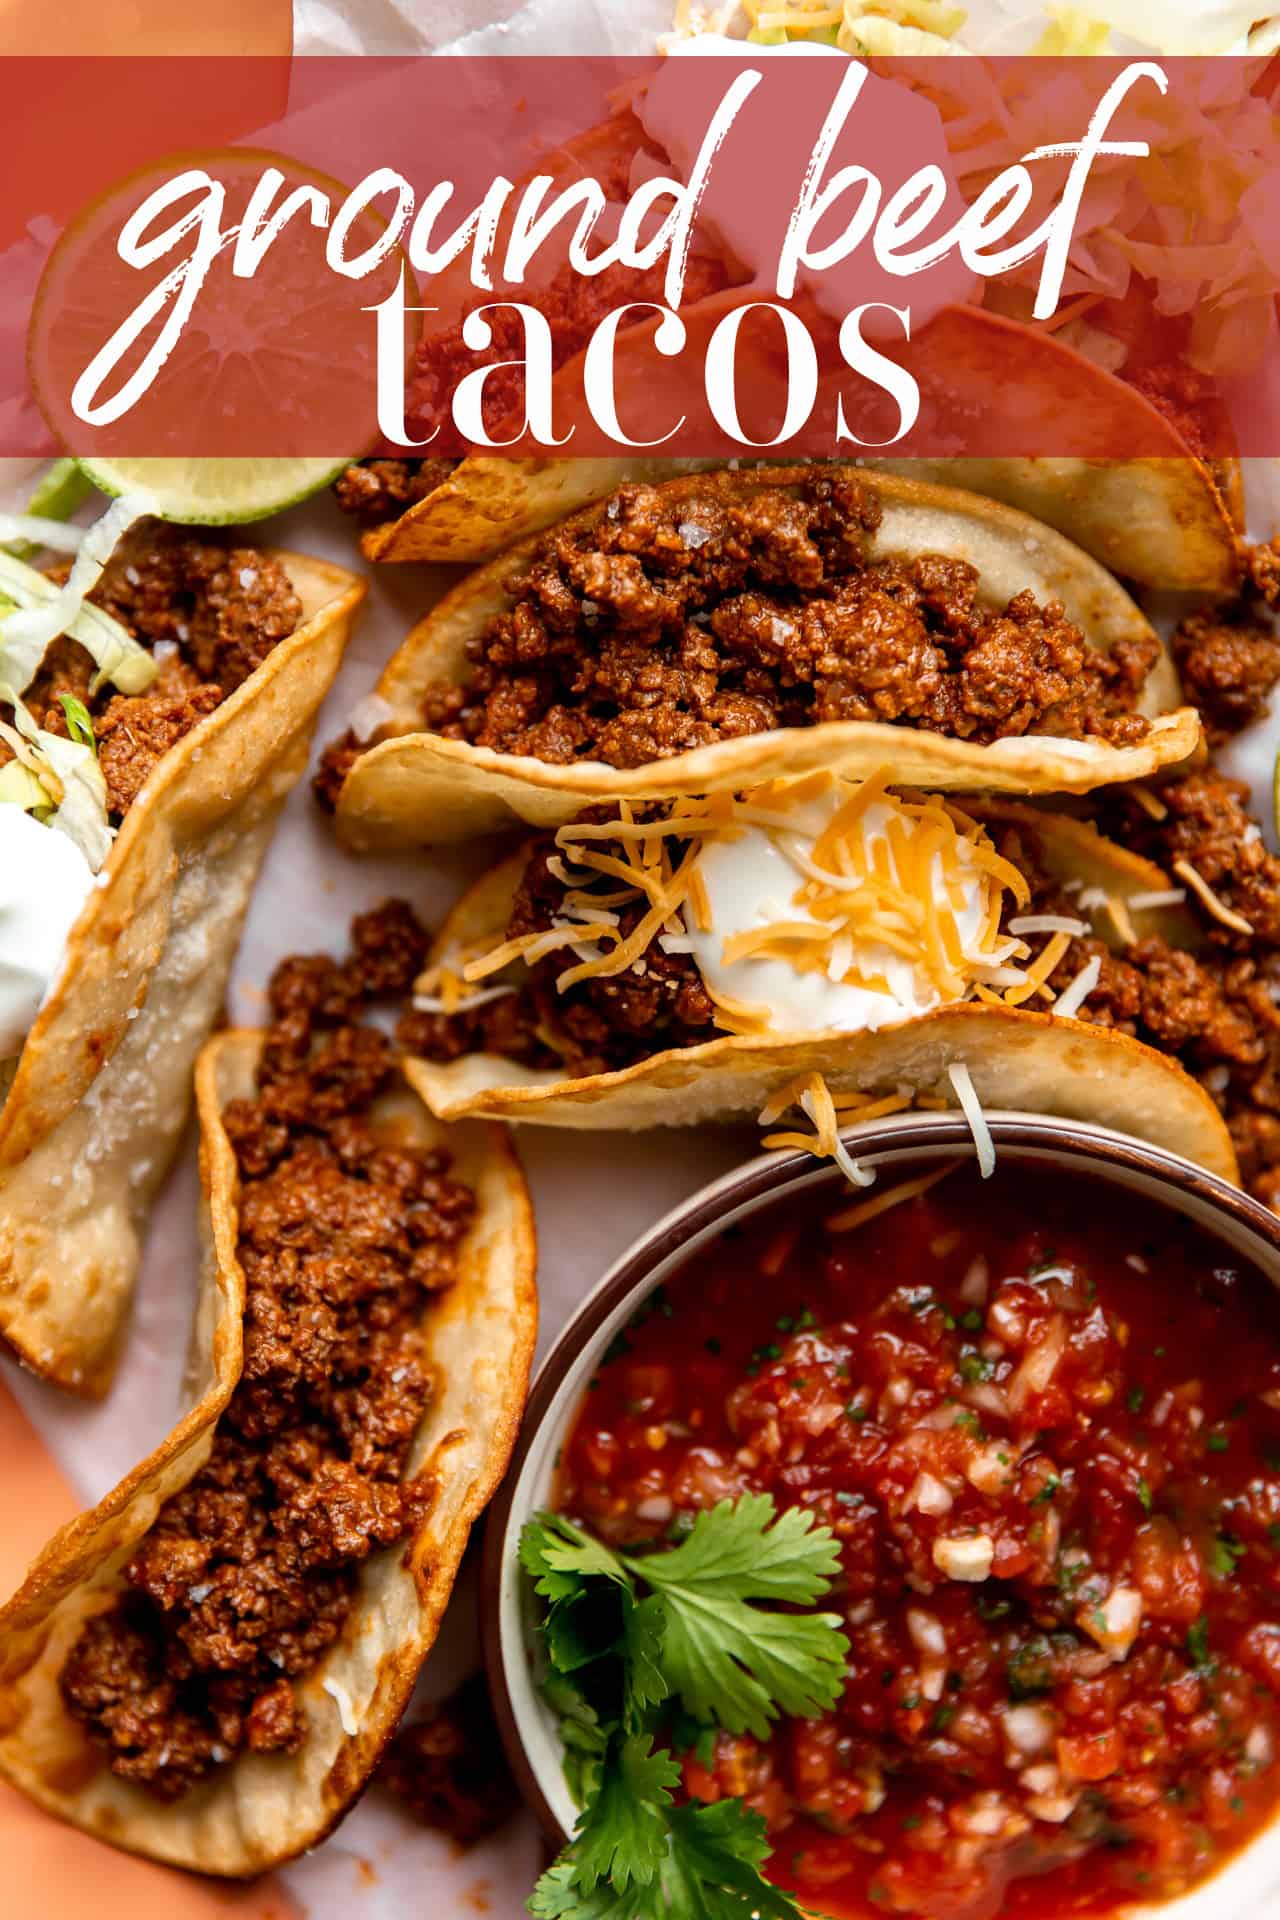 Ground beef tacos on a plate served with a bowl of salsa.